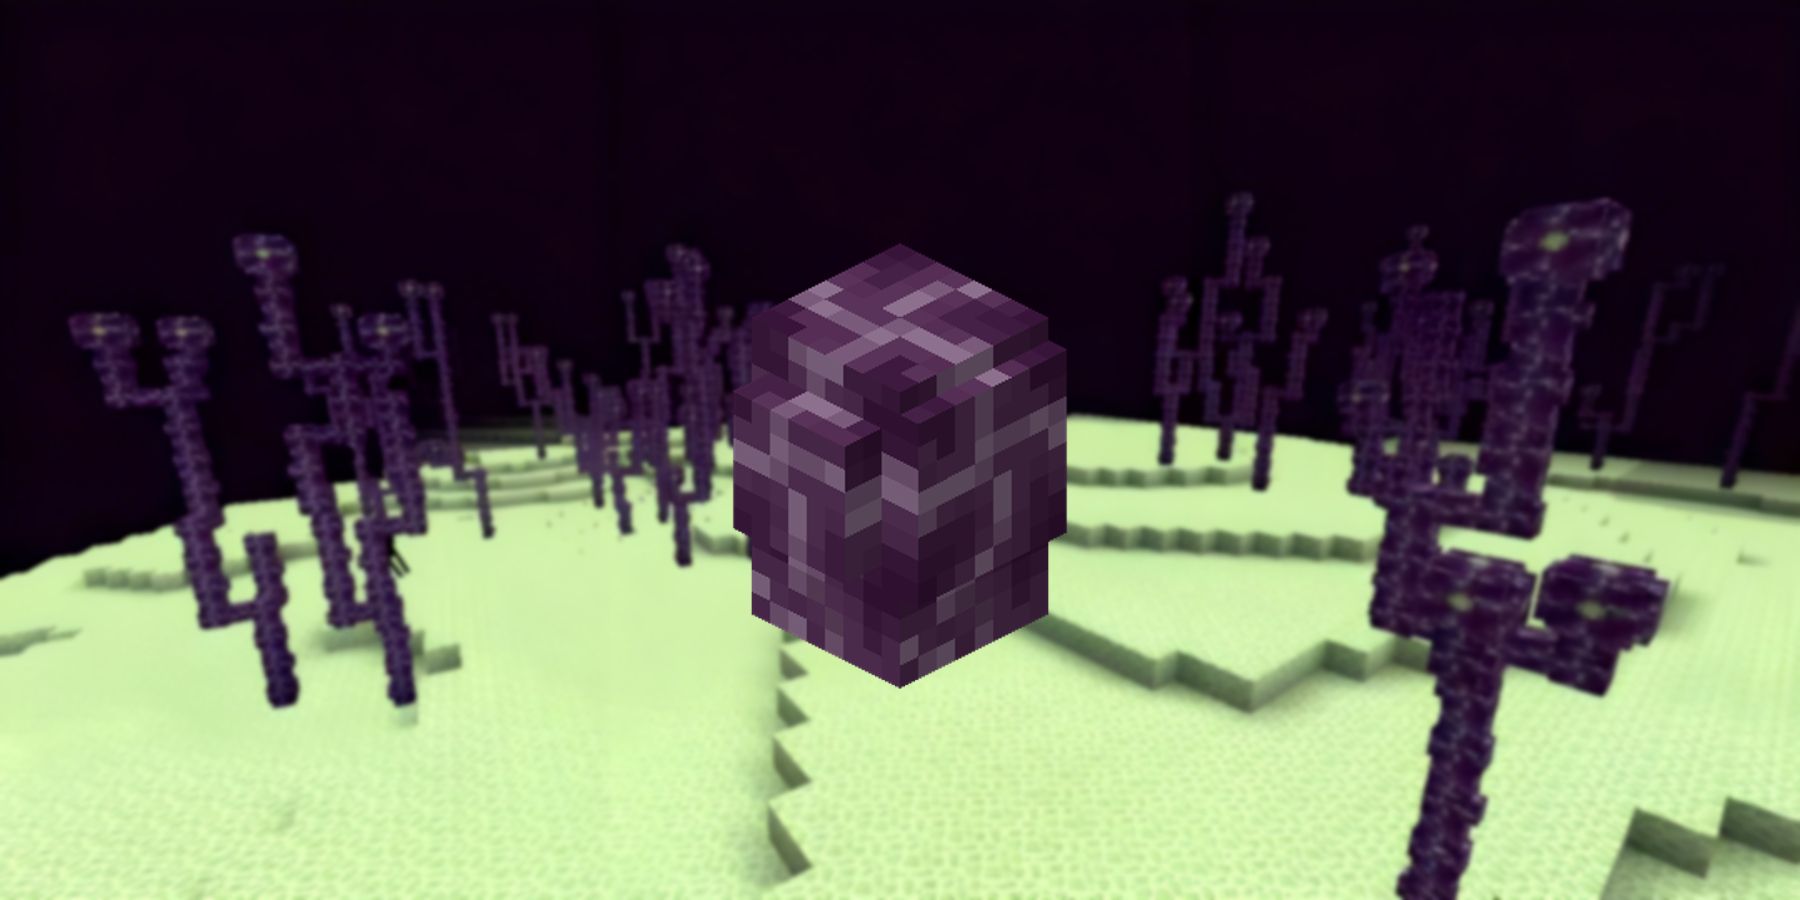 Minecraft's Chorus Plant Block found in The End.